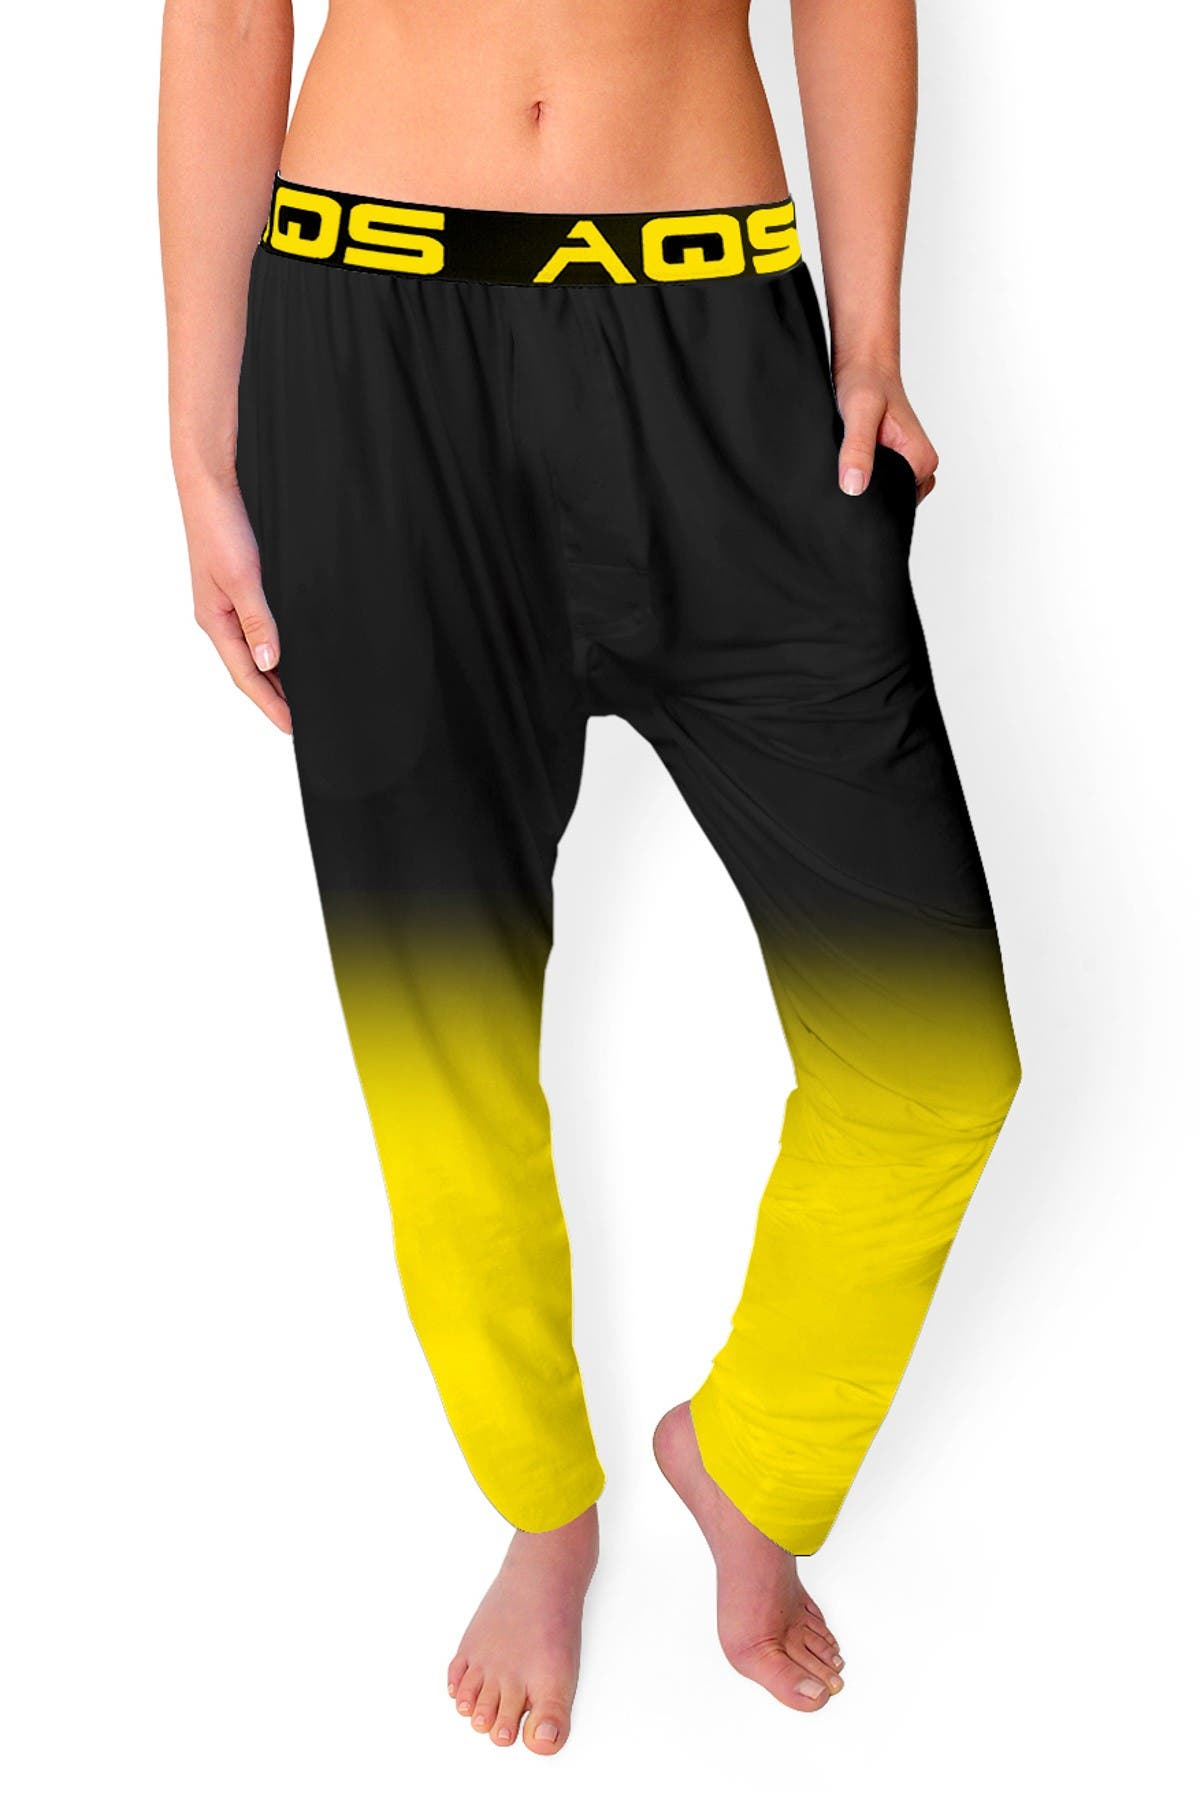 Aqs Ombre Lounge Pants In Black/yellow Ombre